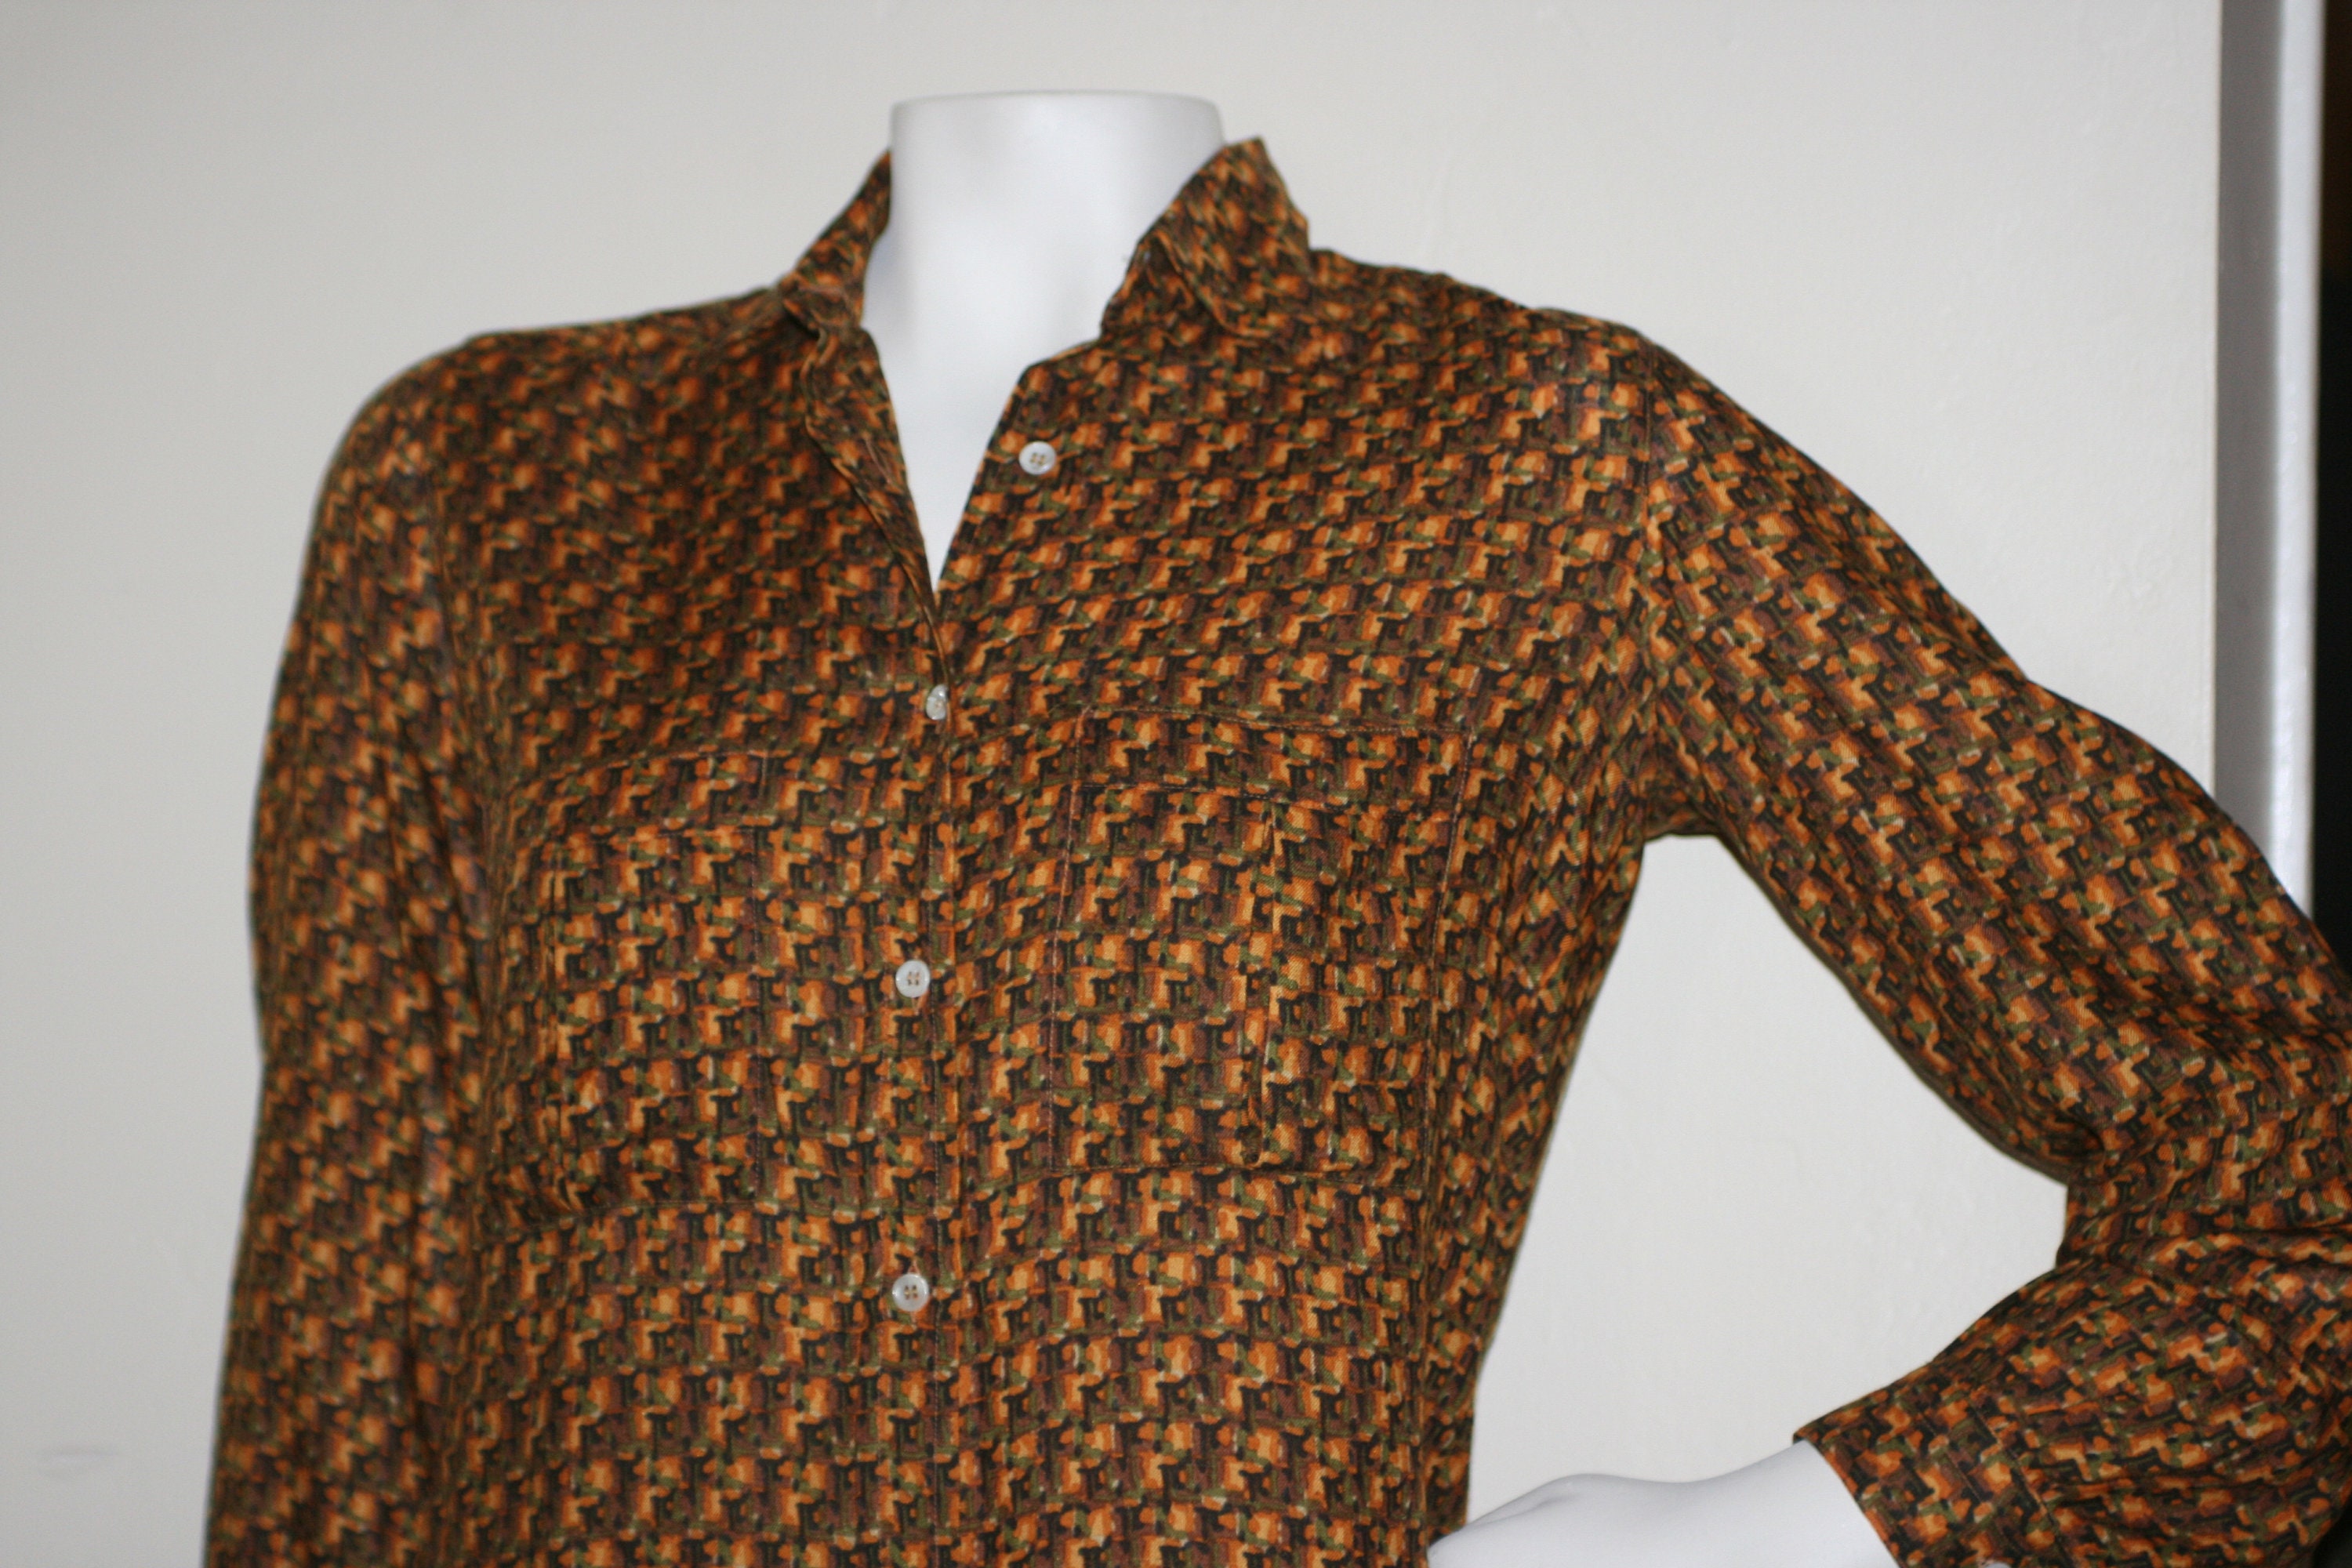 Gucci 'Gucci Loves You' Print Silk Shirt, Size 50, Blue, Ready-to-wear